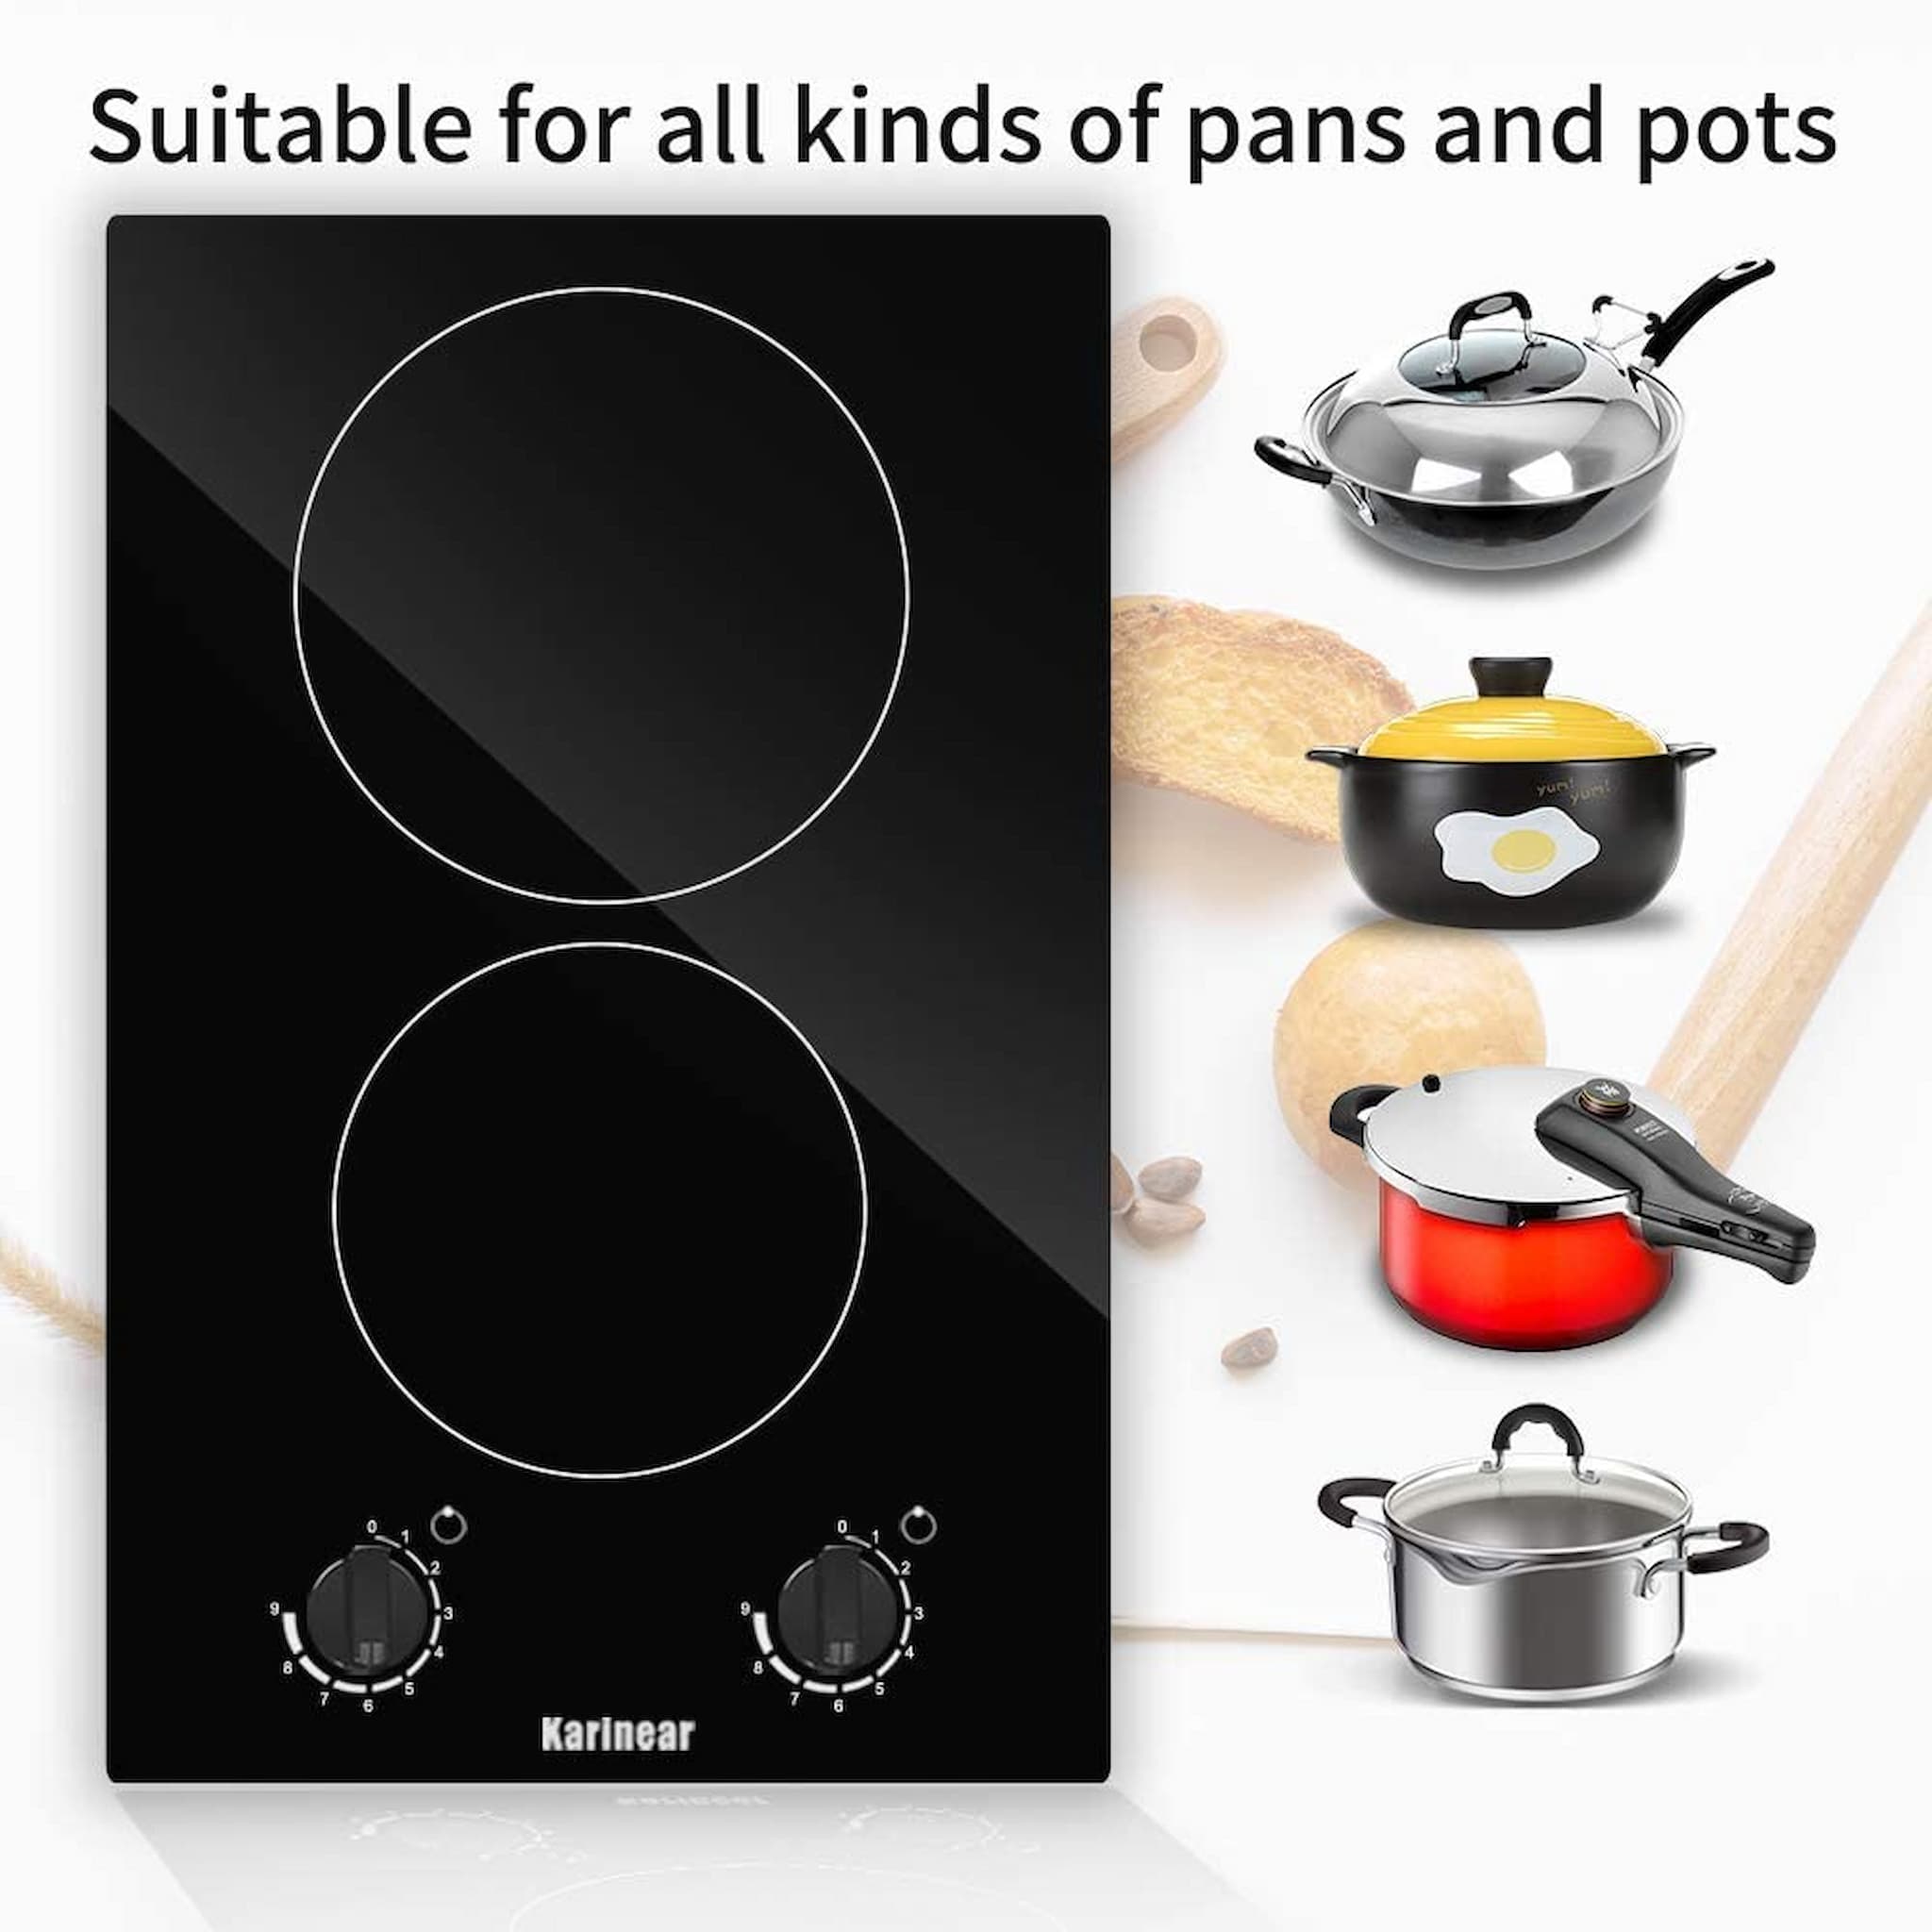 【 Suitable for All Types of Cookwares 】Karinear electric radiant cooktop can be used with any type of cookware in your home, such as aluminium pans, copper pans, cast iron frying pans and non-magnetic stainless steel pans can heats cookware efficiently with minimal heat loss. Simply wipe with a clean cloth when cool. Please install according to the product manual and contact us at any time.